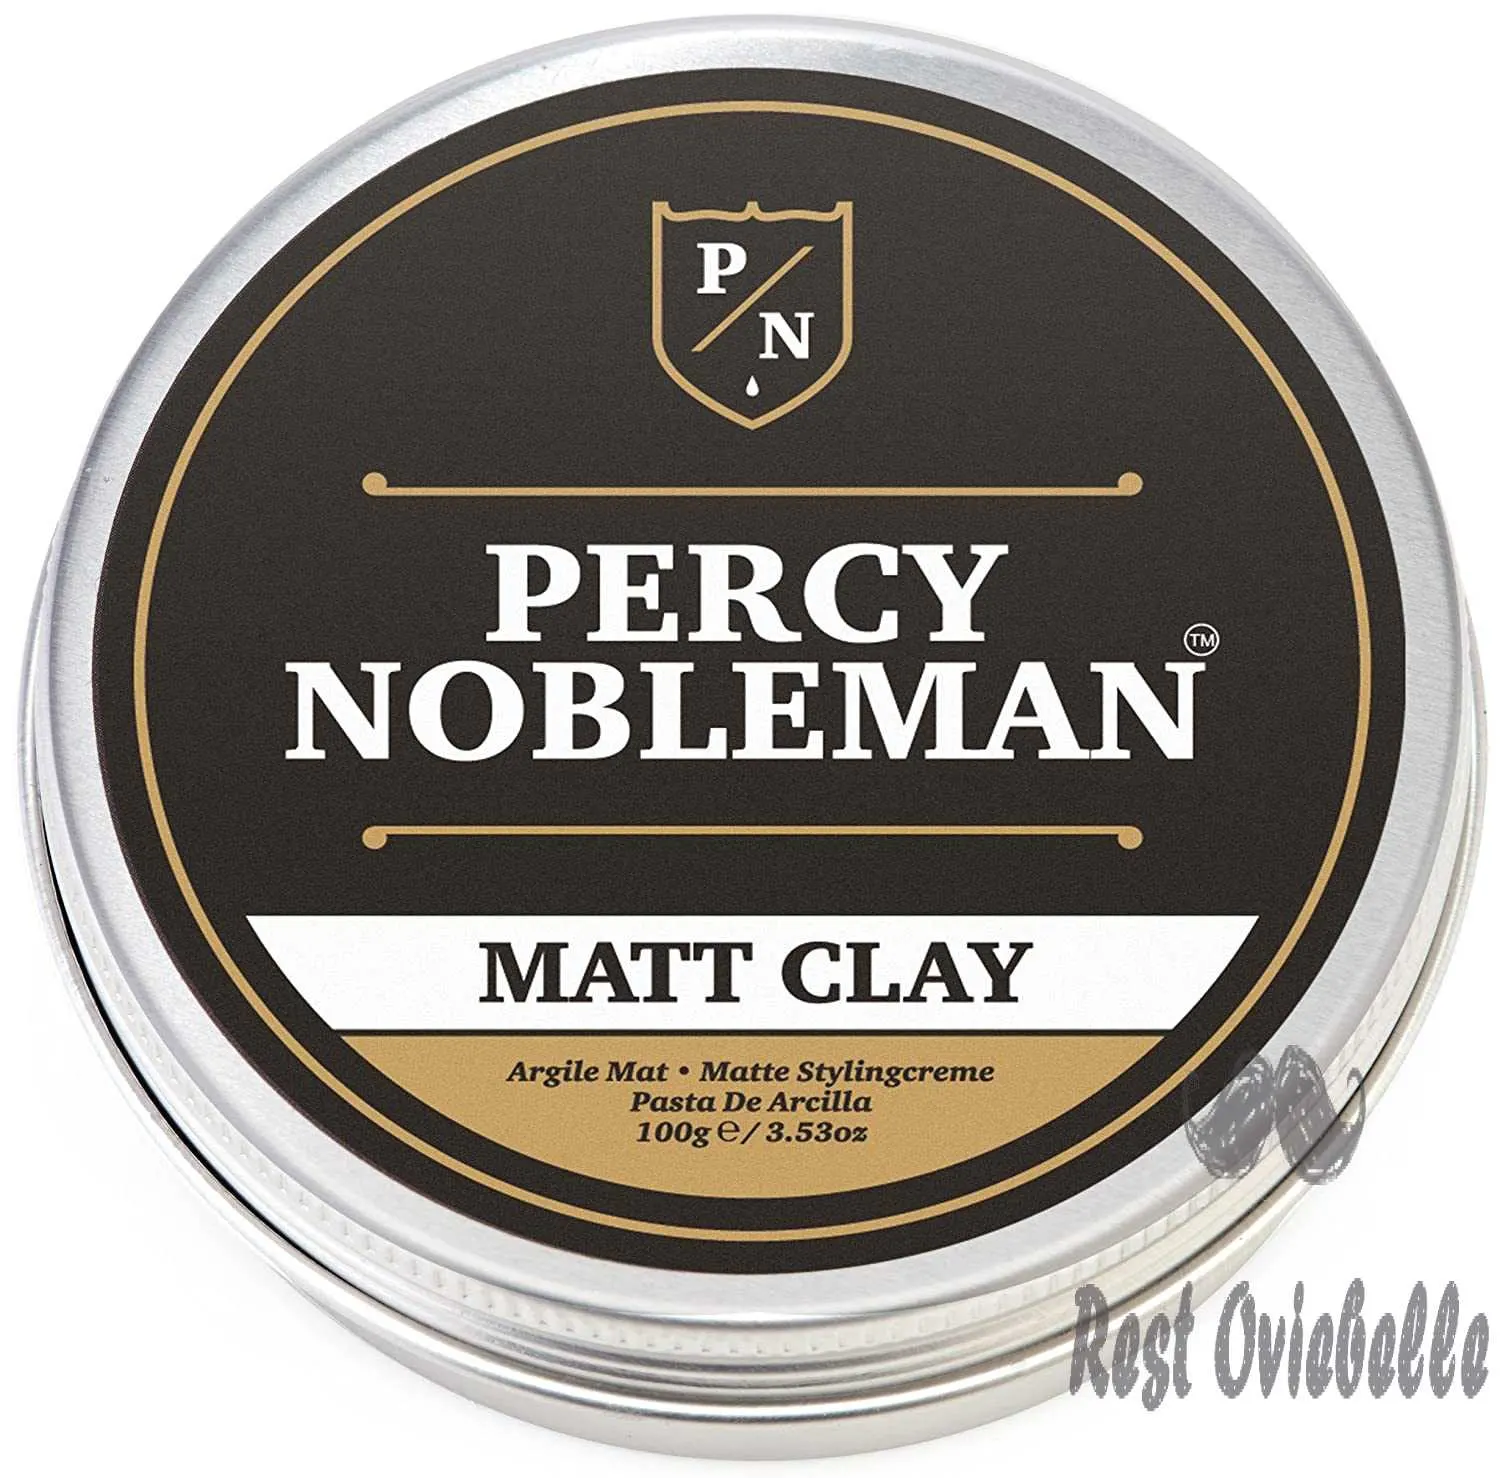 matte clay by percy nobleman b017a7st3a